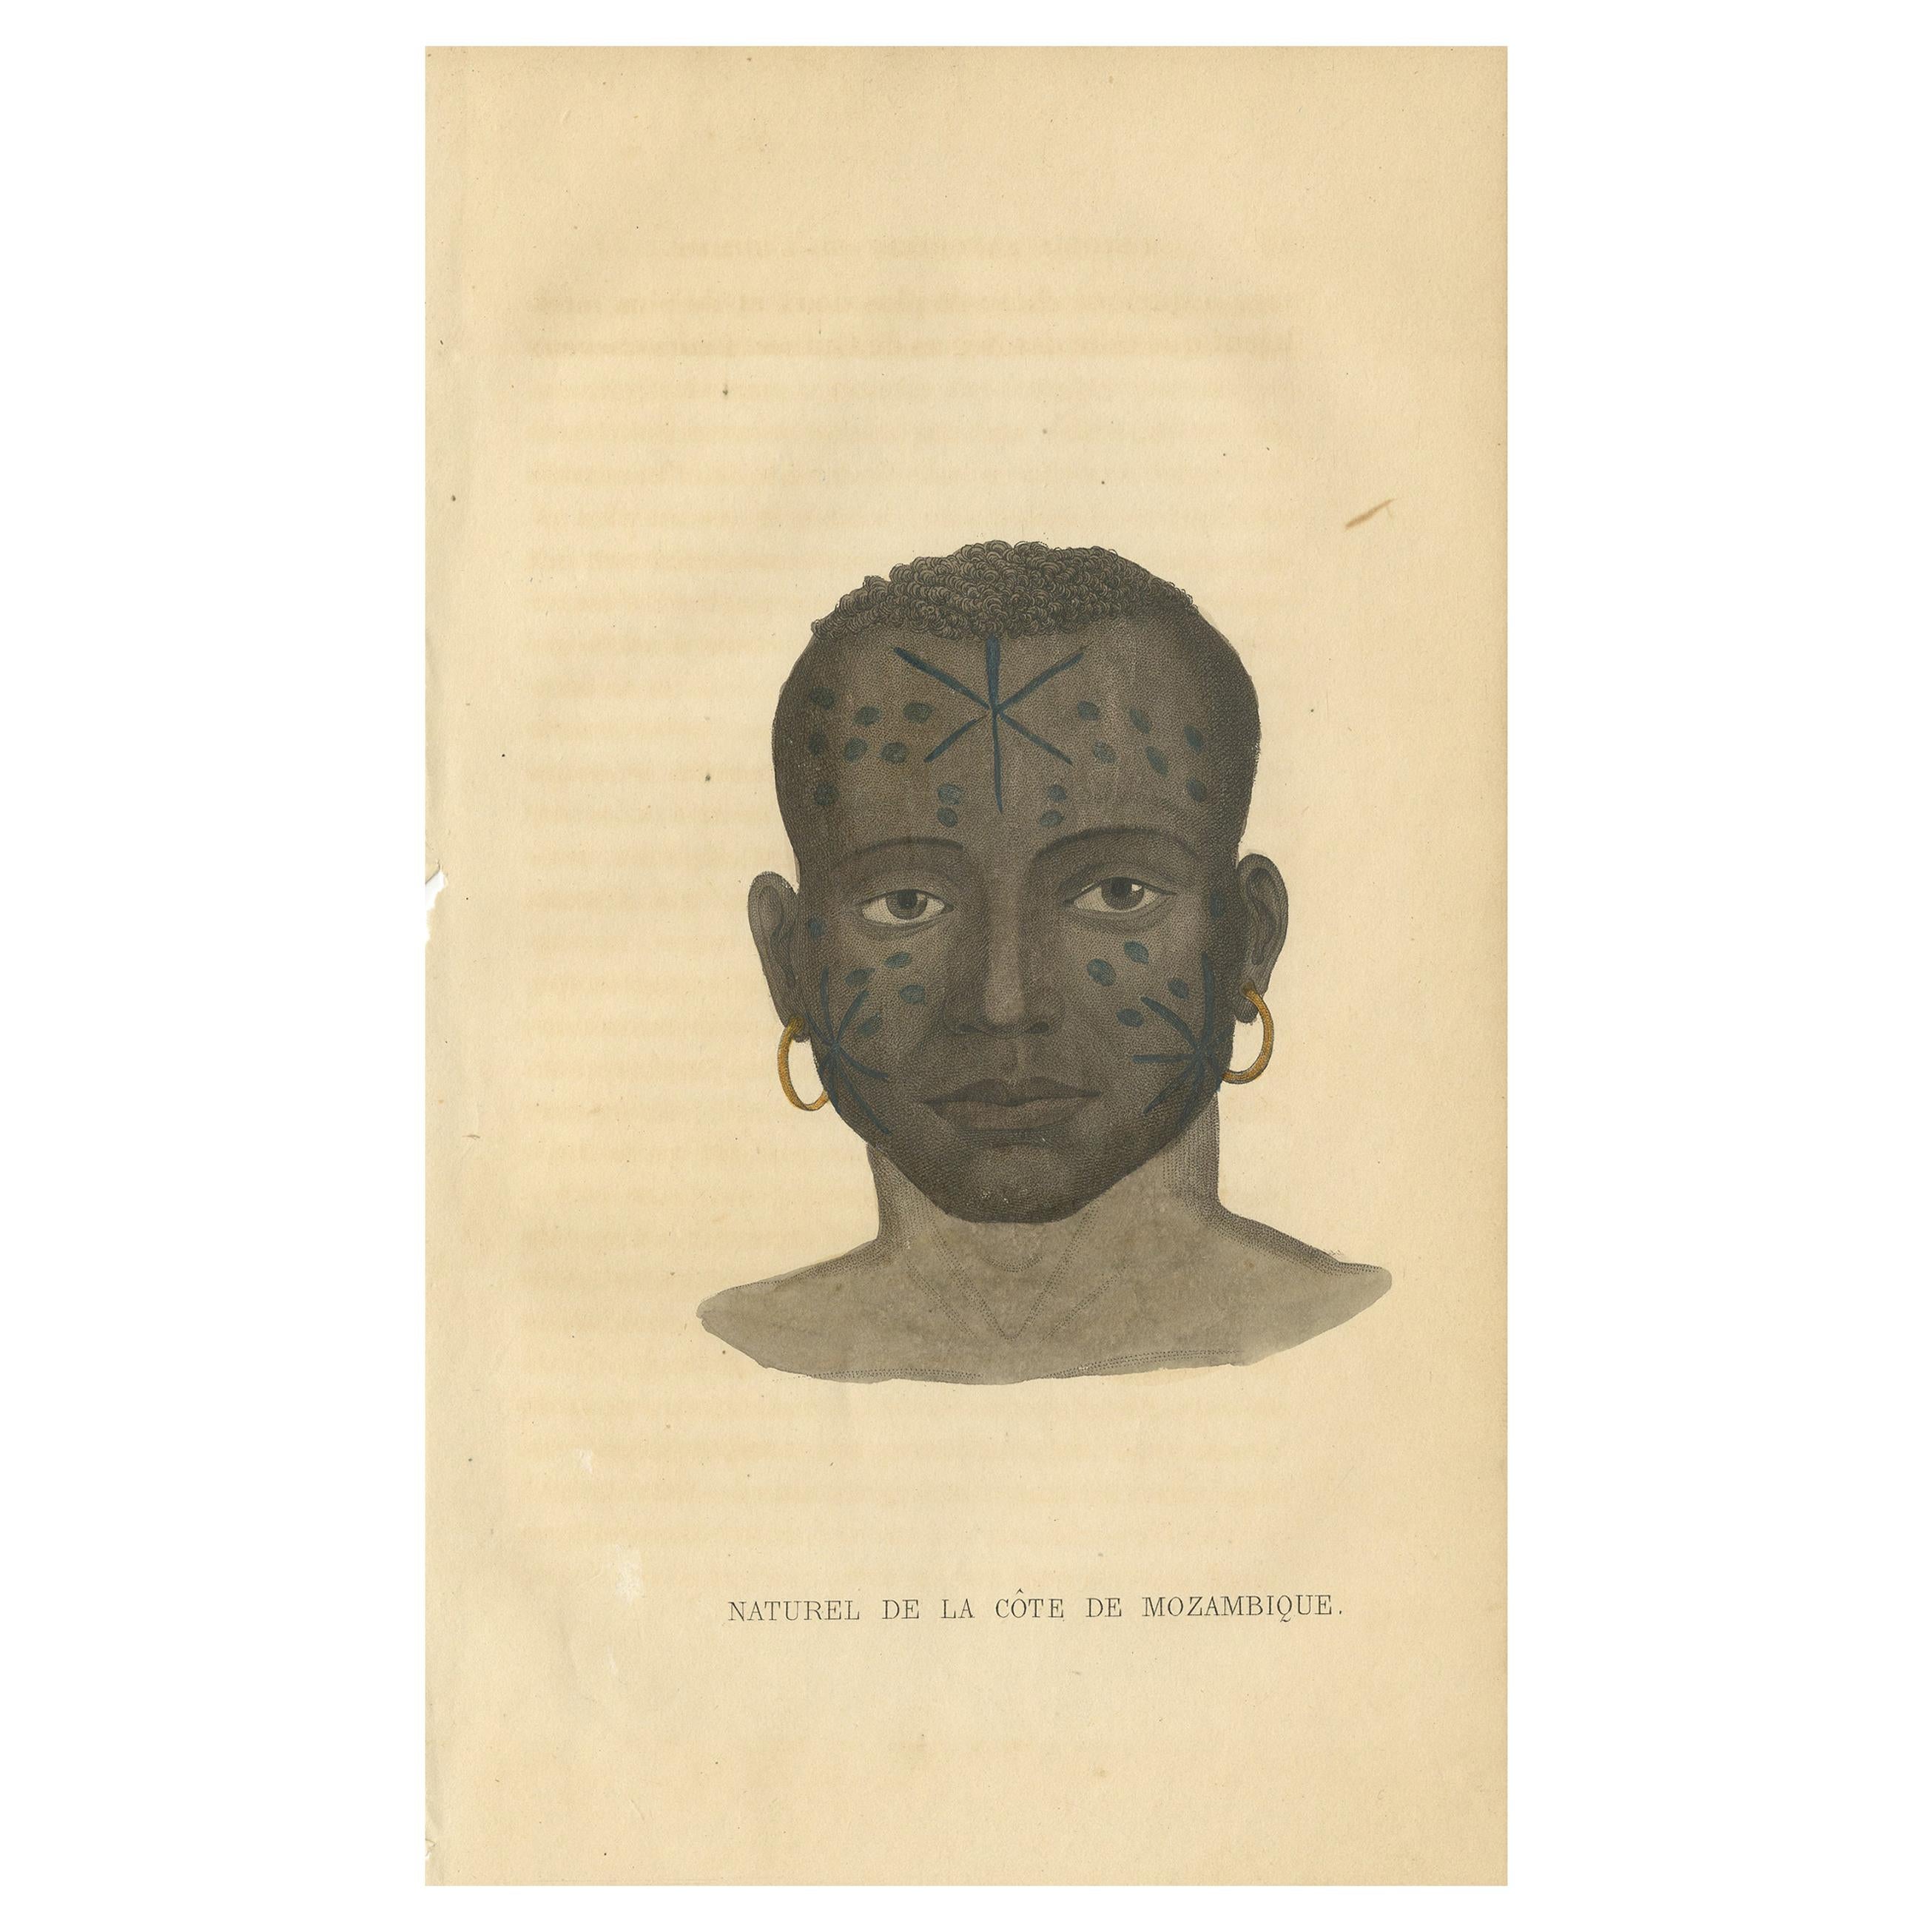 Antique Print of a Native of the Mozambique Coast by Prichard, 1843